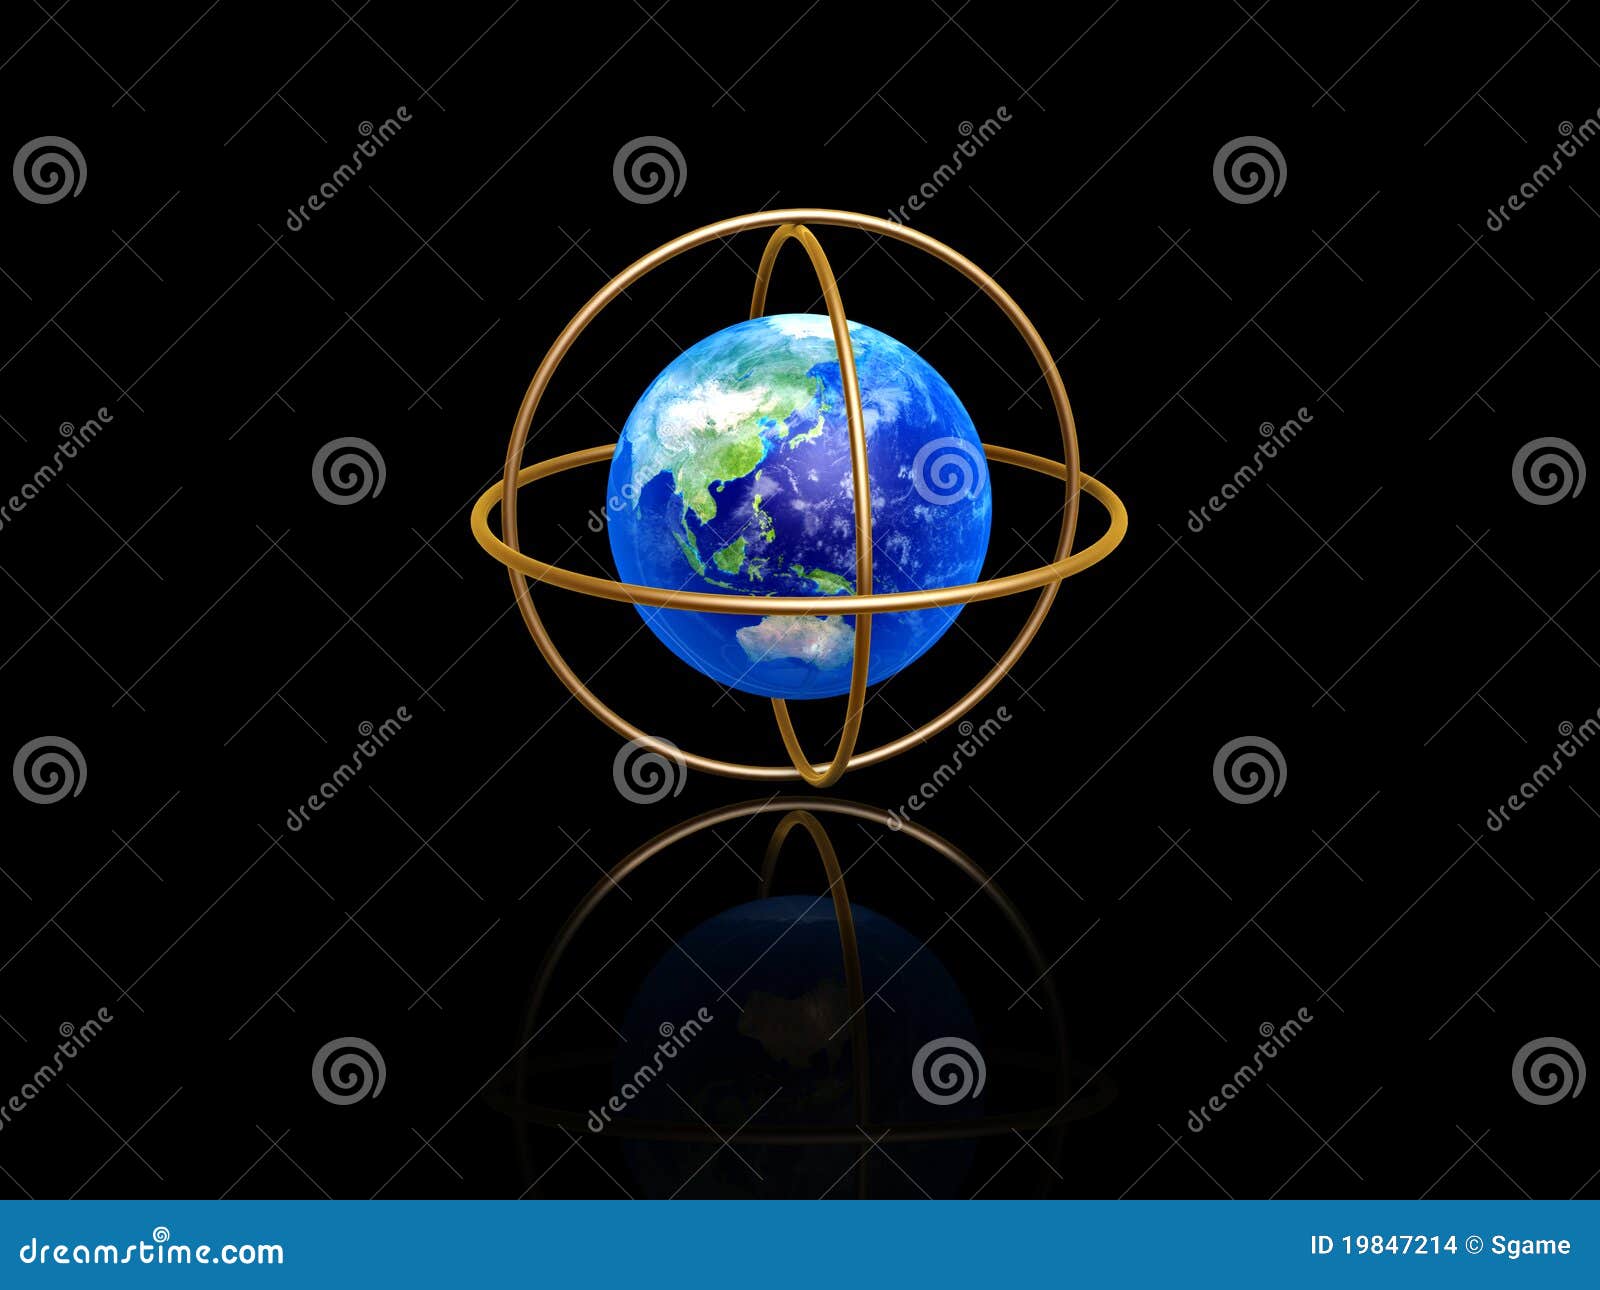 earth with longitude and latitude rings